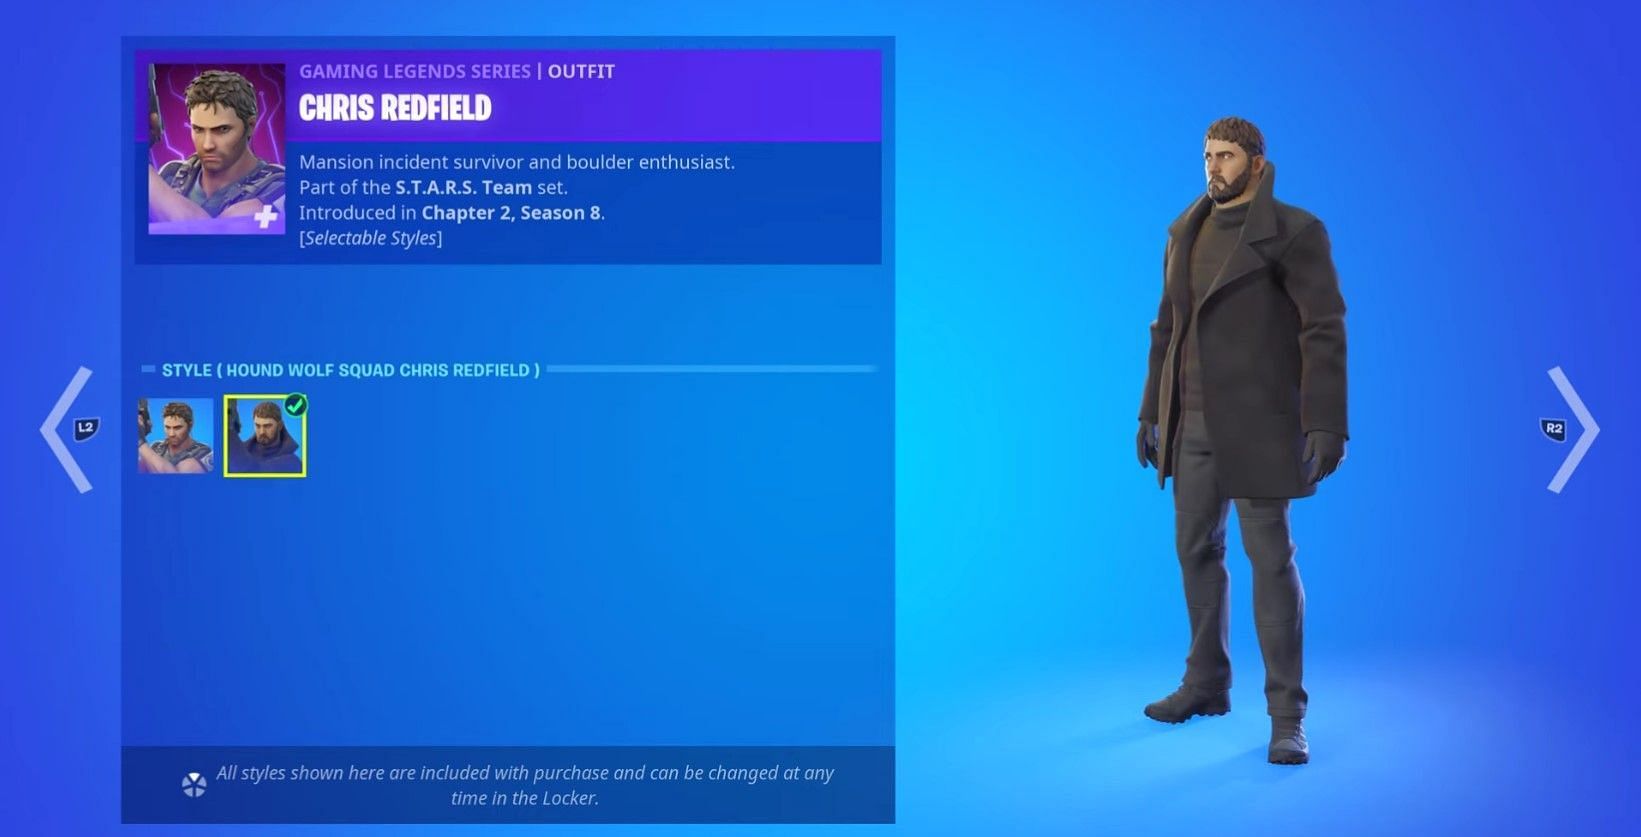 Hound Wolf Squad selectable style for Chris Redfield skin (Image via Fortnite)